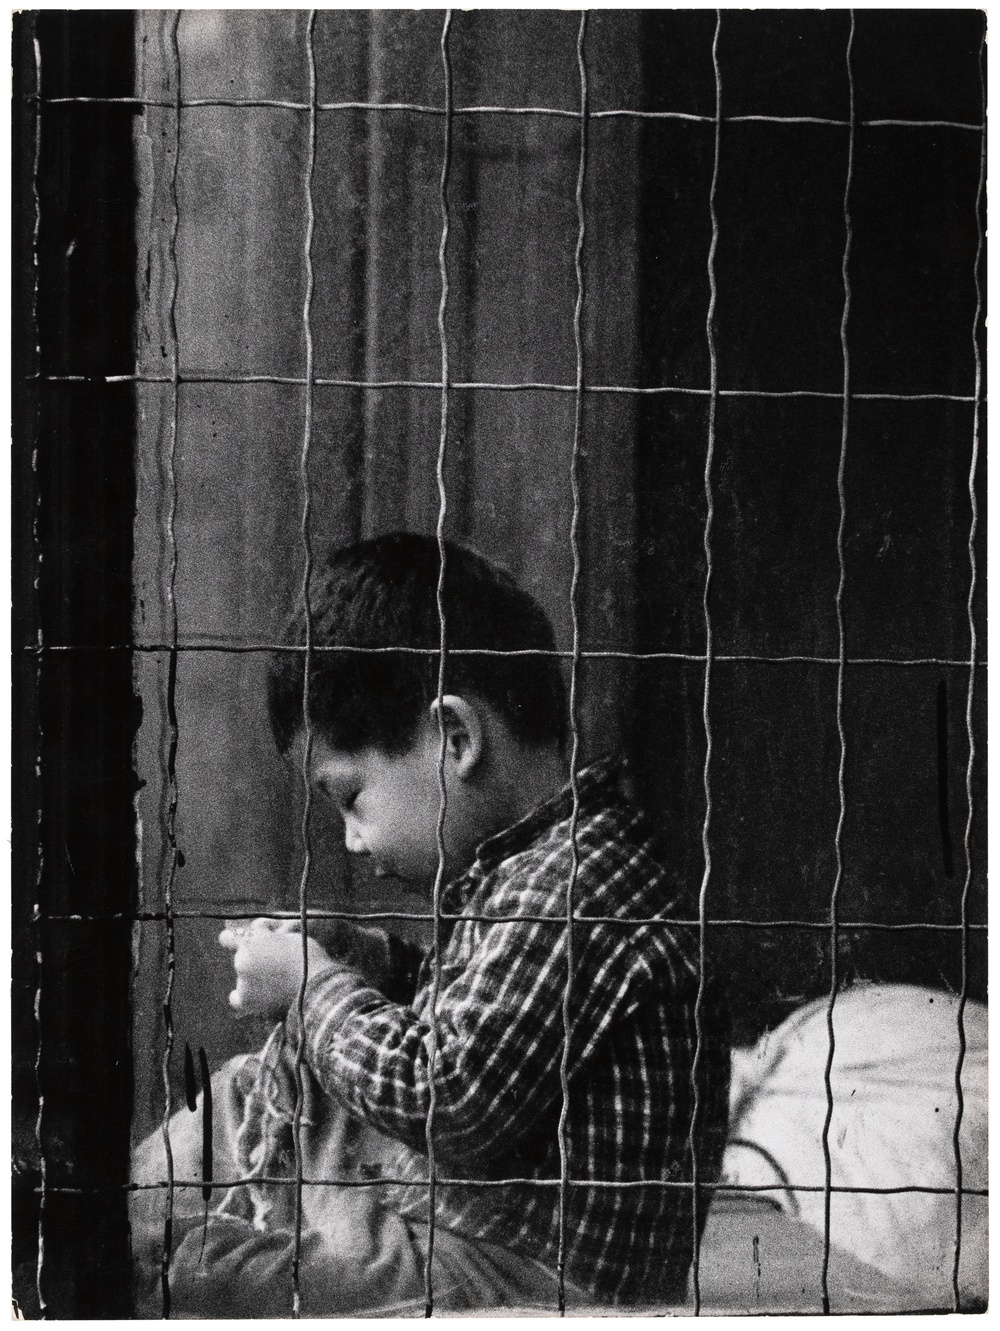 A black and white photograph taken through a gridded security window of a small child in profile working with string in his hand.